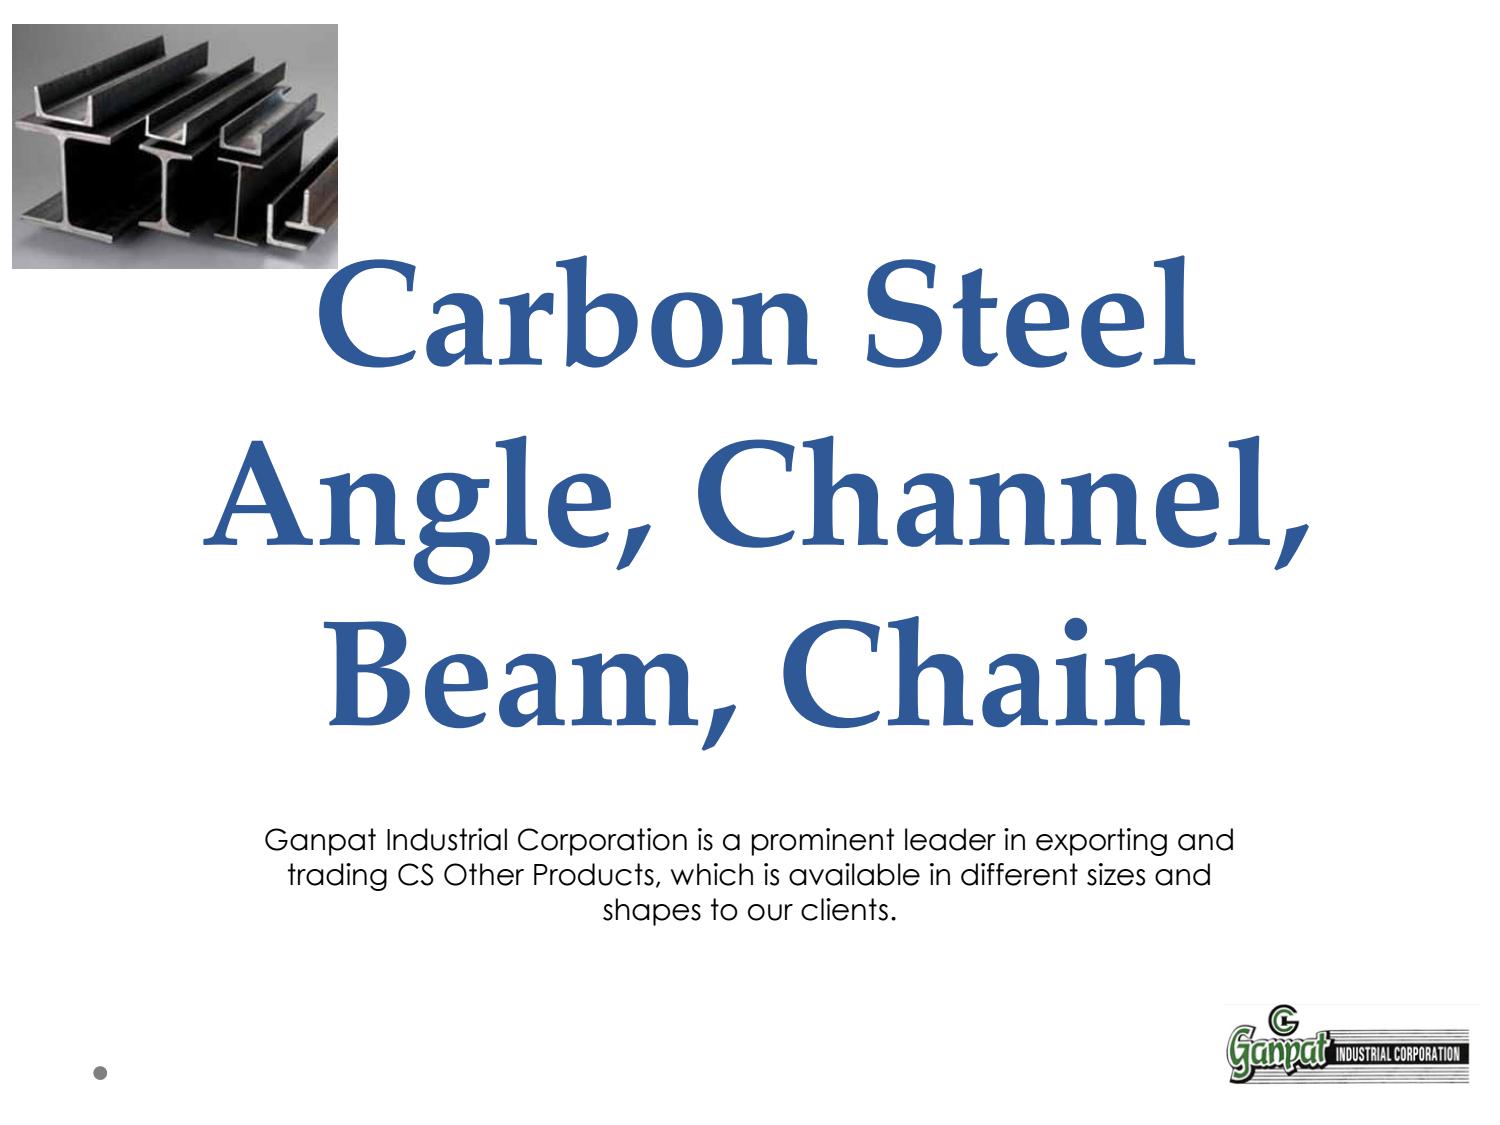 Ie

Carbon Steel
Angle, Channel,
Beam, Chain

Ganpat Industrial Corporation is a prominent leader in exporting and
trading CS Other Products, which is available in different sizes and
shapes to our clients.